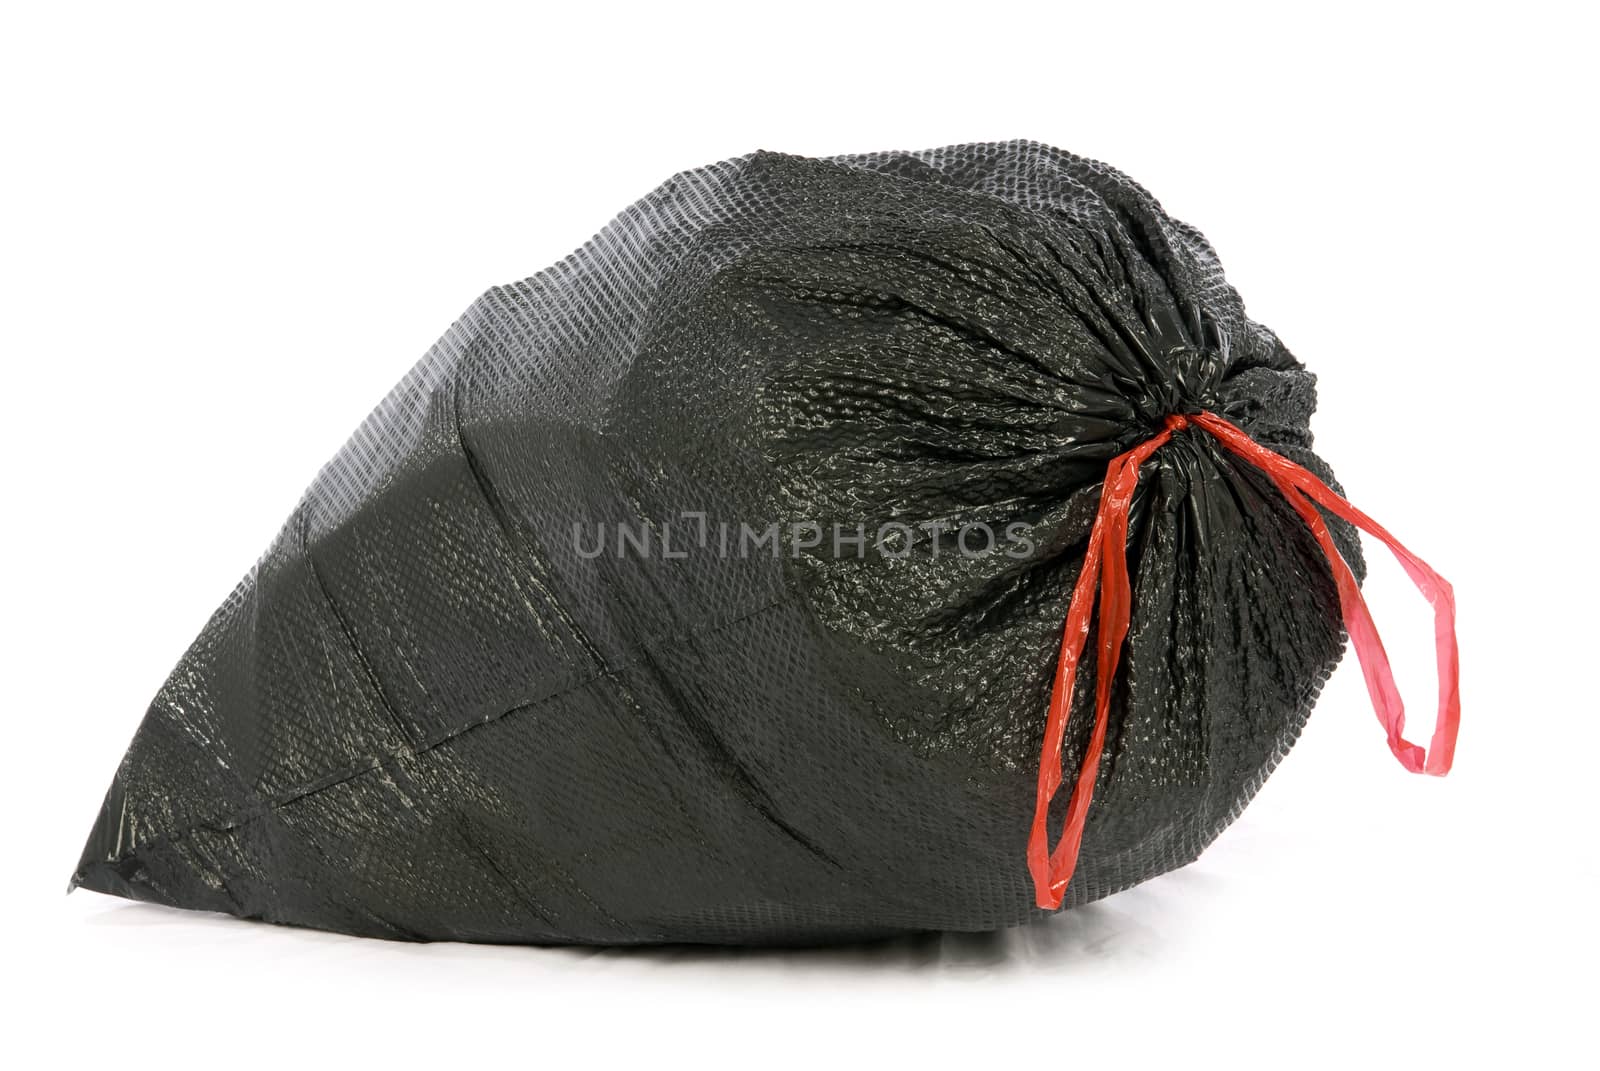 Large Garbage Bag on White Background by stockbuster1